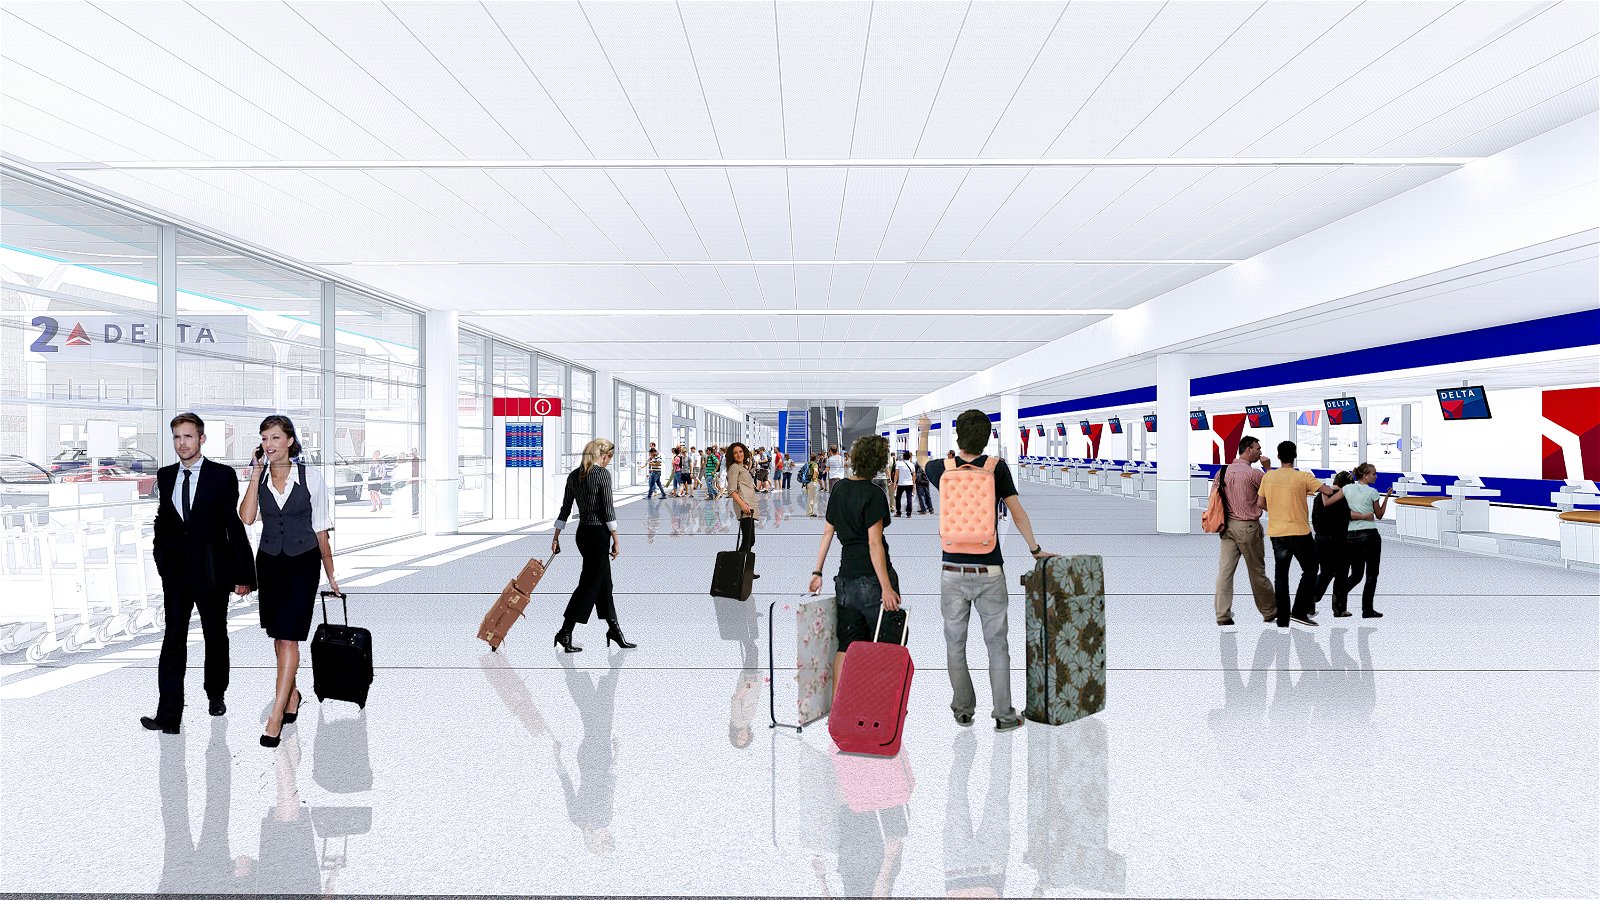 Delta's rendering of its Terminal 2 ticketing area, to be completed in 2021